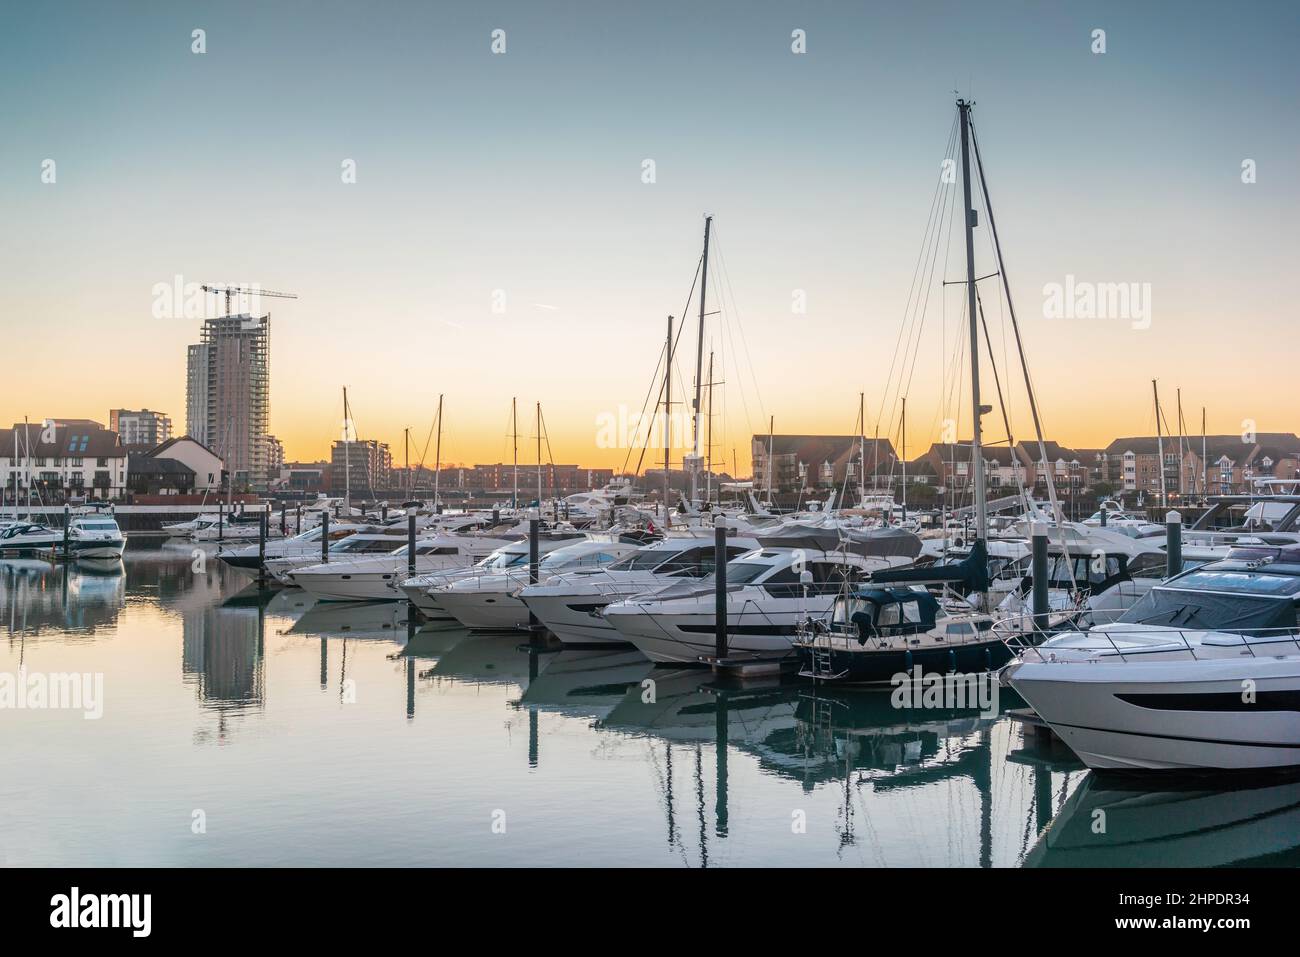 Boats moored at Ocean Village Marina at sunrise early morning with view to Woolston, Southampton, Hampshire, England, UK Stock Photo